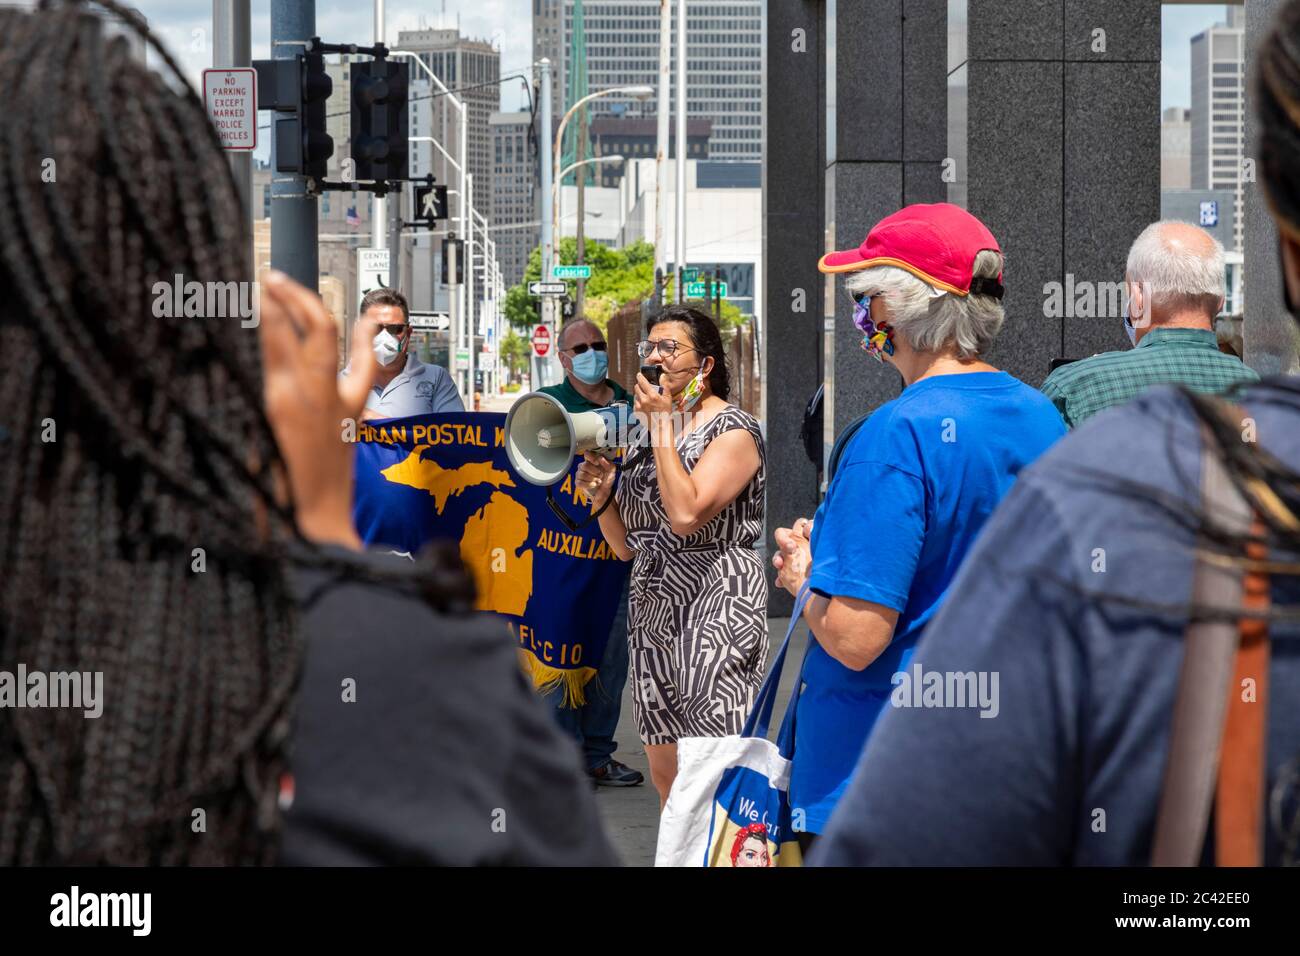 Detroit, Michigan, USA. 23rd June, 2020. Congresswoman Rashida Tlaib speaks at a rally at Detroit's main post office to 'Save America's Postal Service.' The event was part of a nationwide campaign by the American Postal Workers Union. Credit: Jim West/Alamy Live News Stock Photo